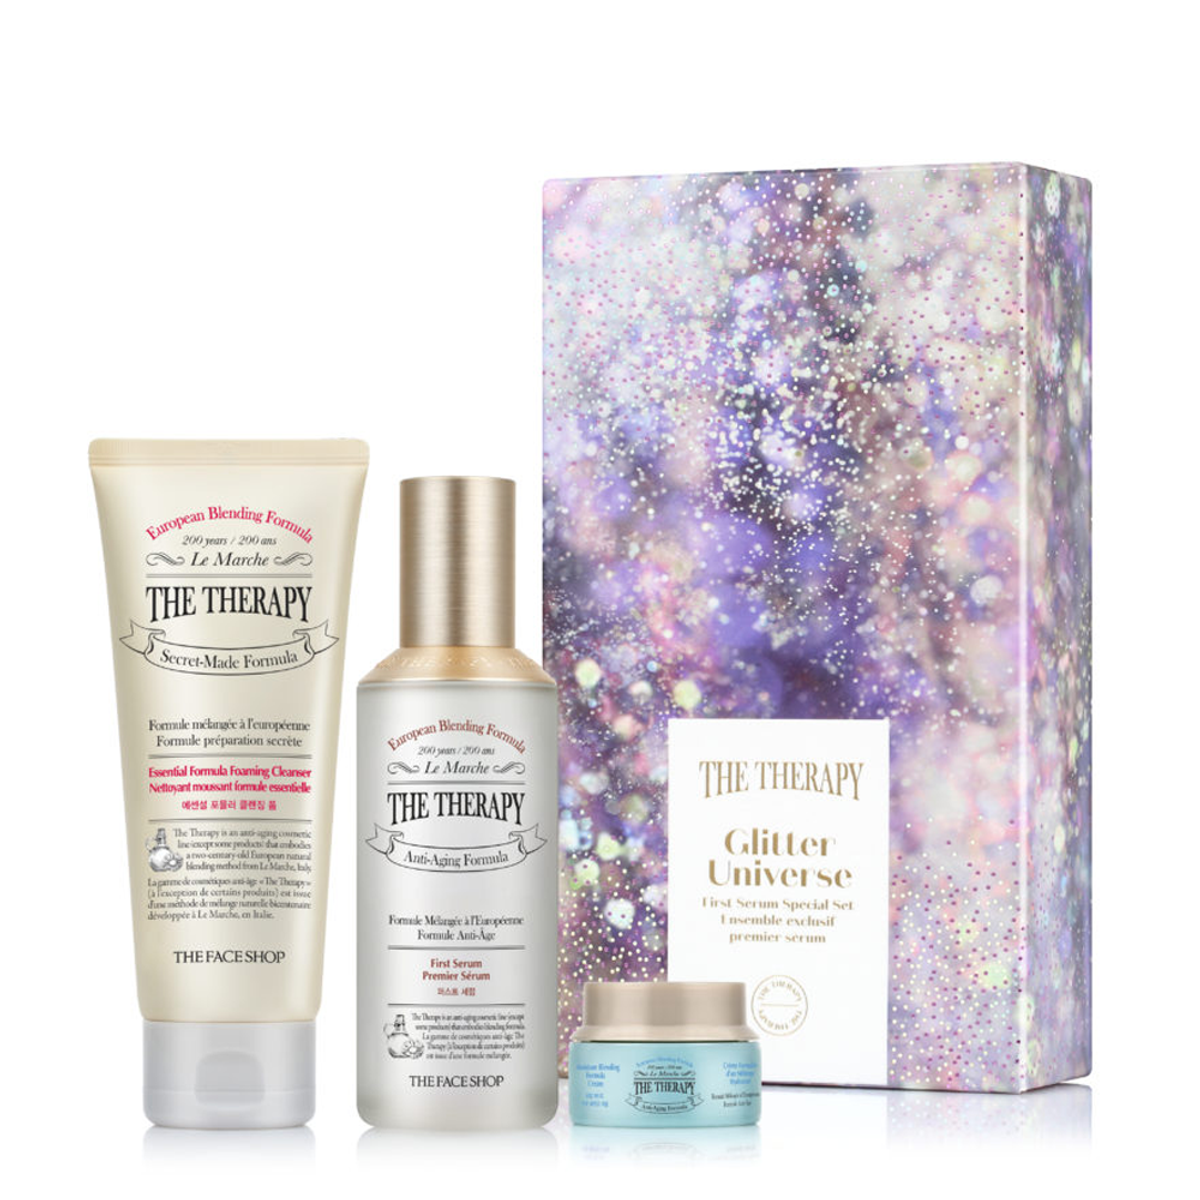 gift-x-mas-holiday-limited-2020-bo-tinh-chat-the-therapy-glitter-universe-first-serum-special-set-3pc-1